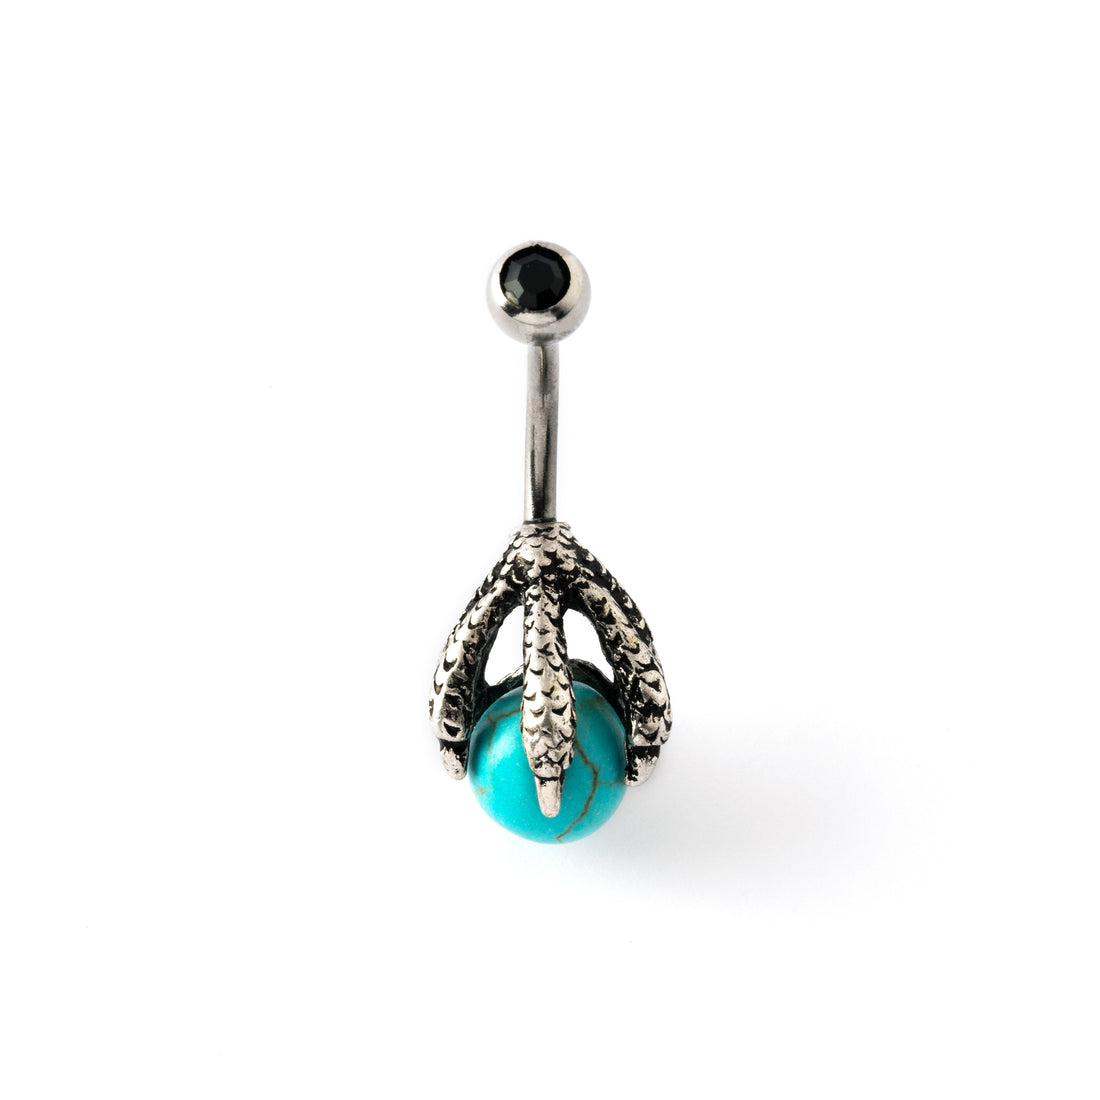 Dragon-Claw-Belly-bar-with-Turquoise